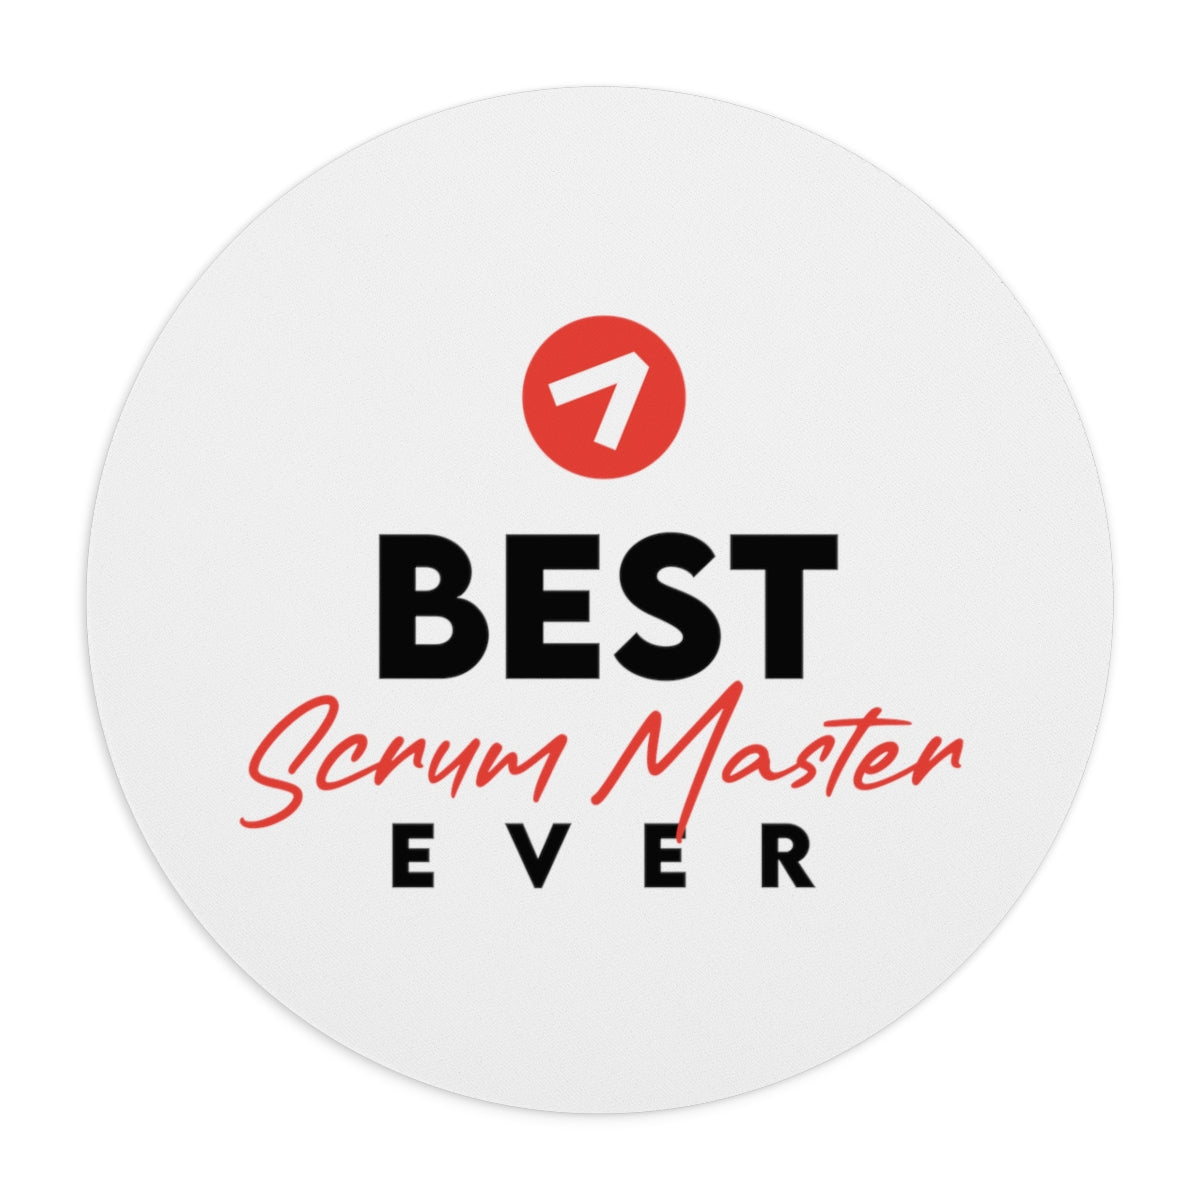 Best Scrum Master ever - Red - Mouse Pad